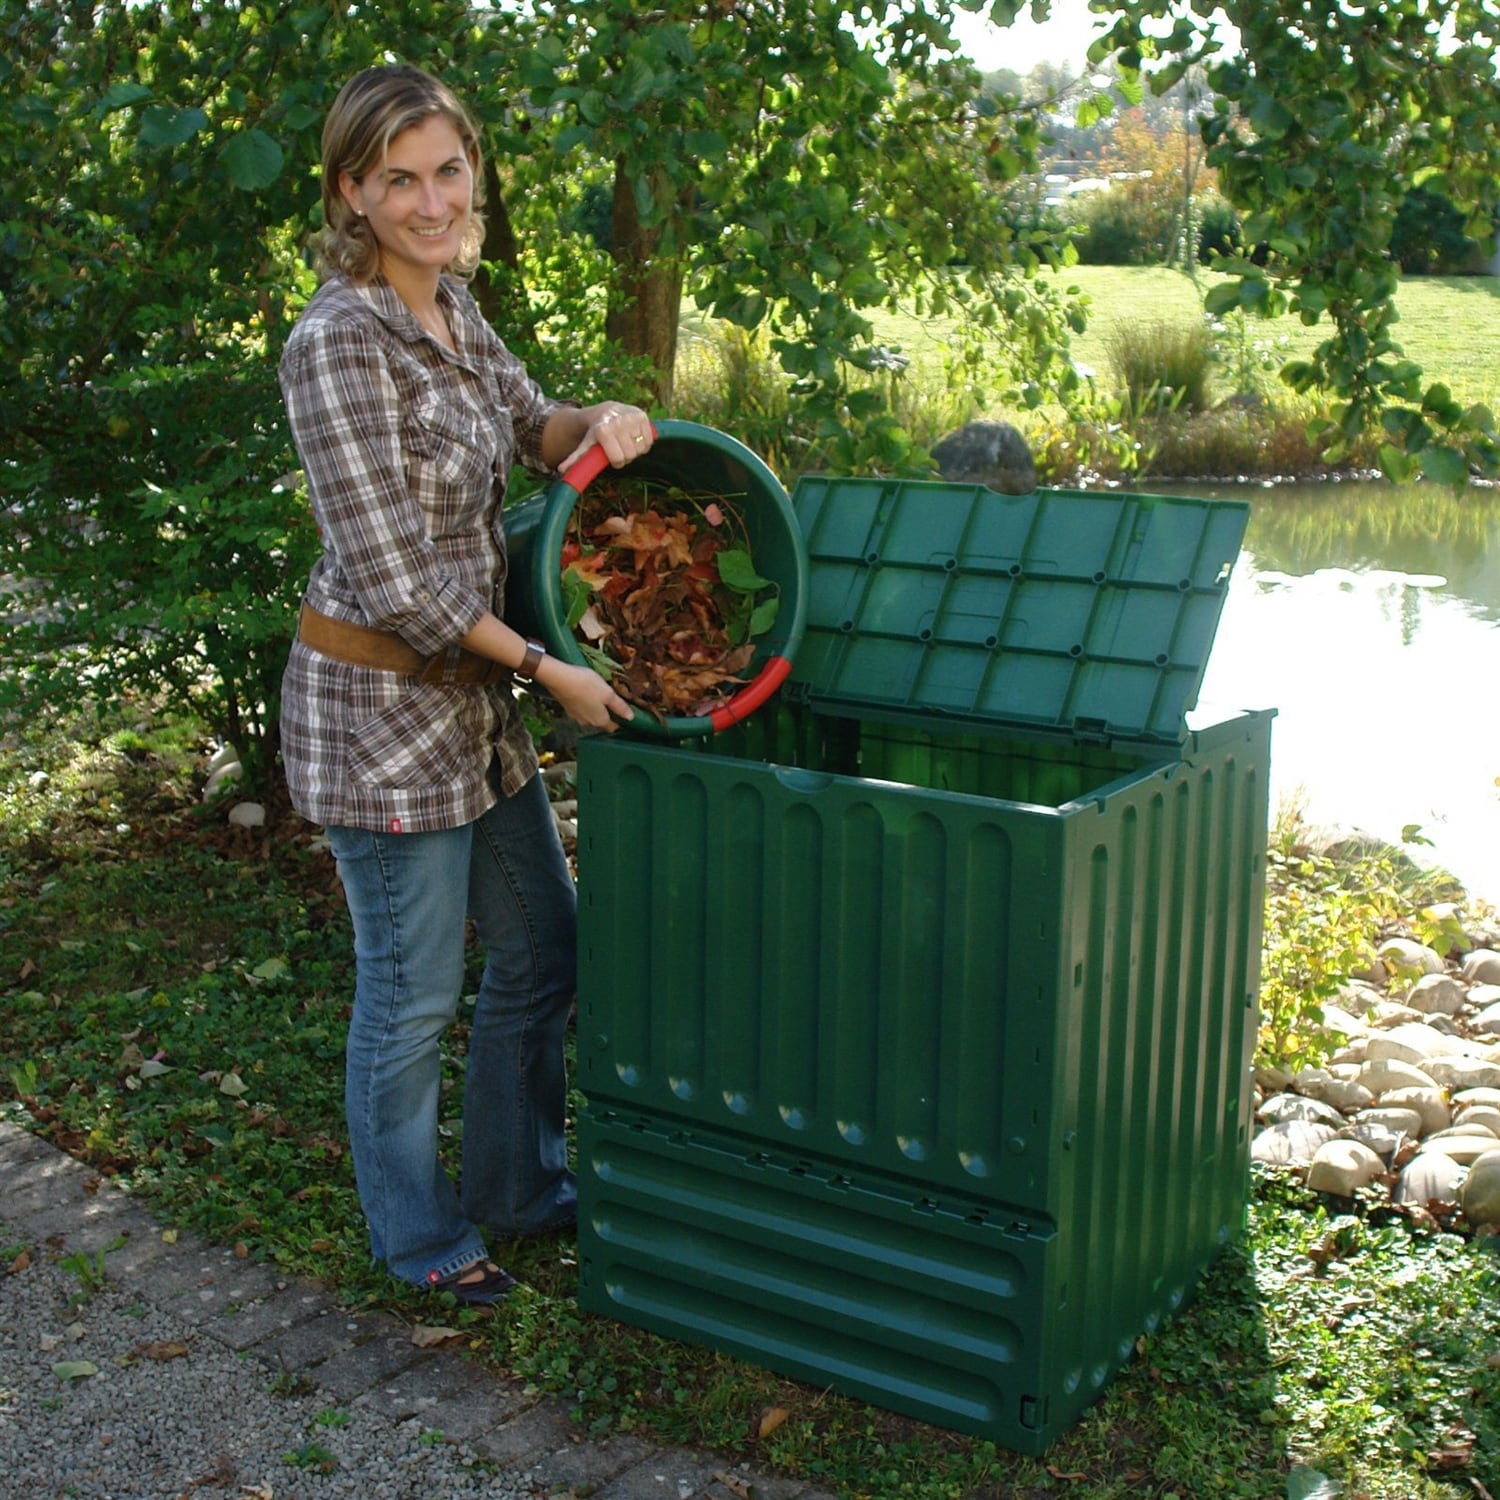 https://ak1.ostkcdn.com/images/products/is/images/direct/b160be37a0c8f6f9a1d5fcac0241c318023ff18e/Outdoor-Composting-110-Gallon-Composter-Recycle-Plastic-Compost-Bin---Green.jpg